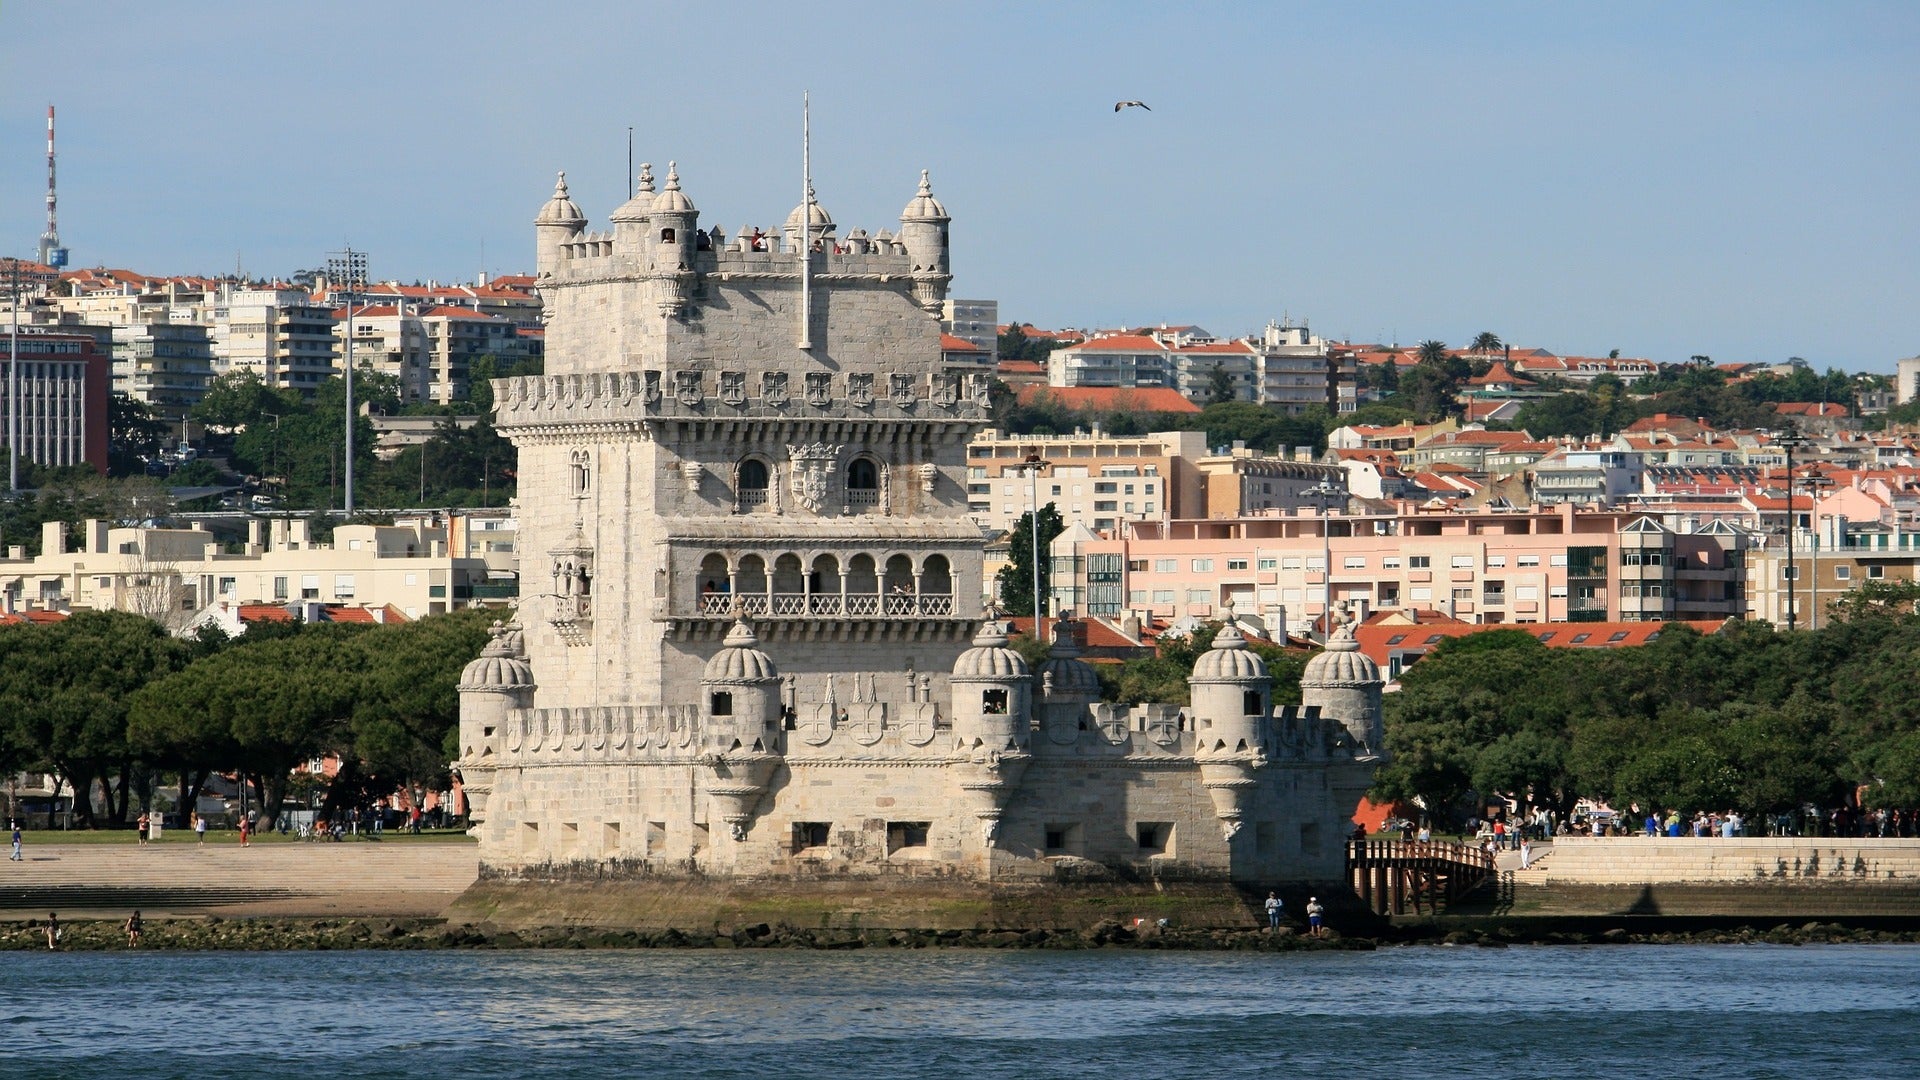 Water and portugese buildings with as small castle as travel target for esim